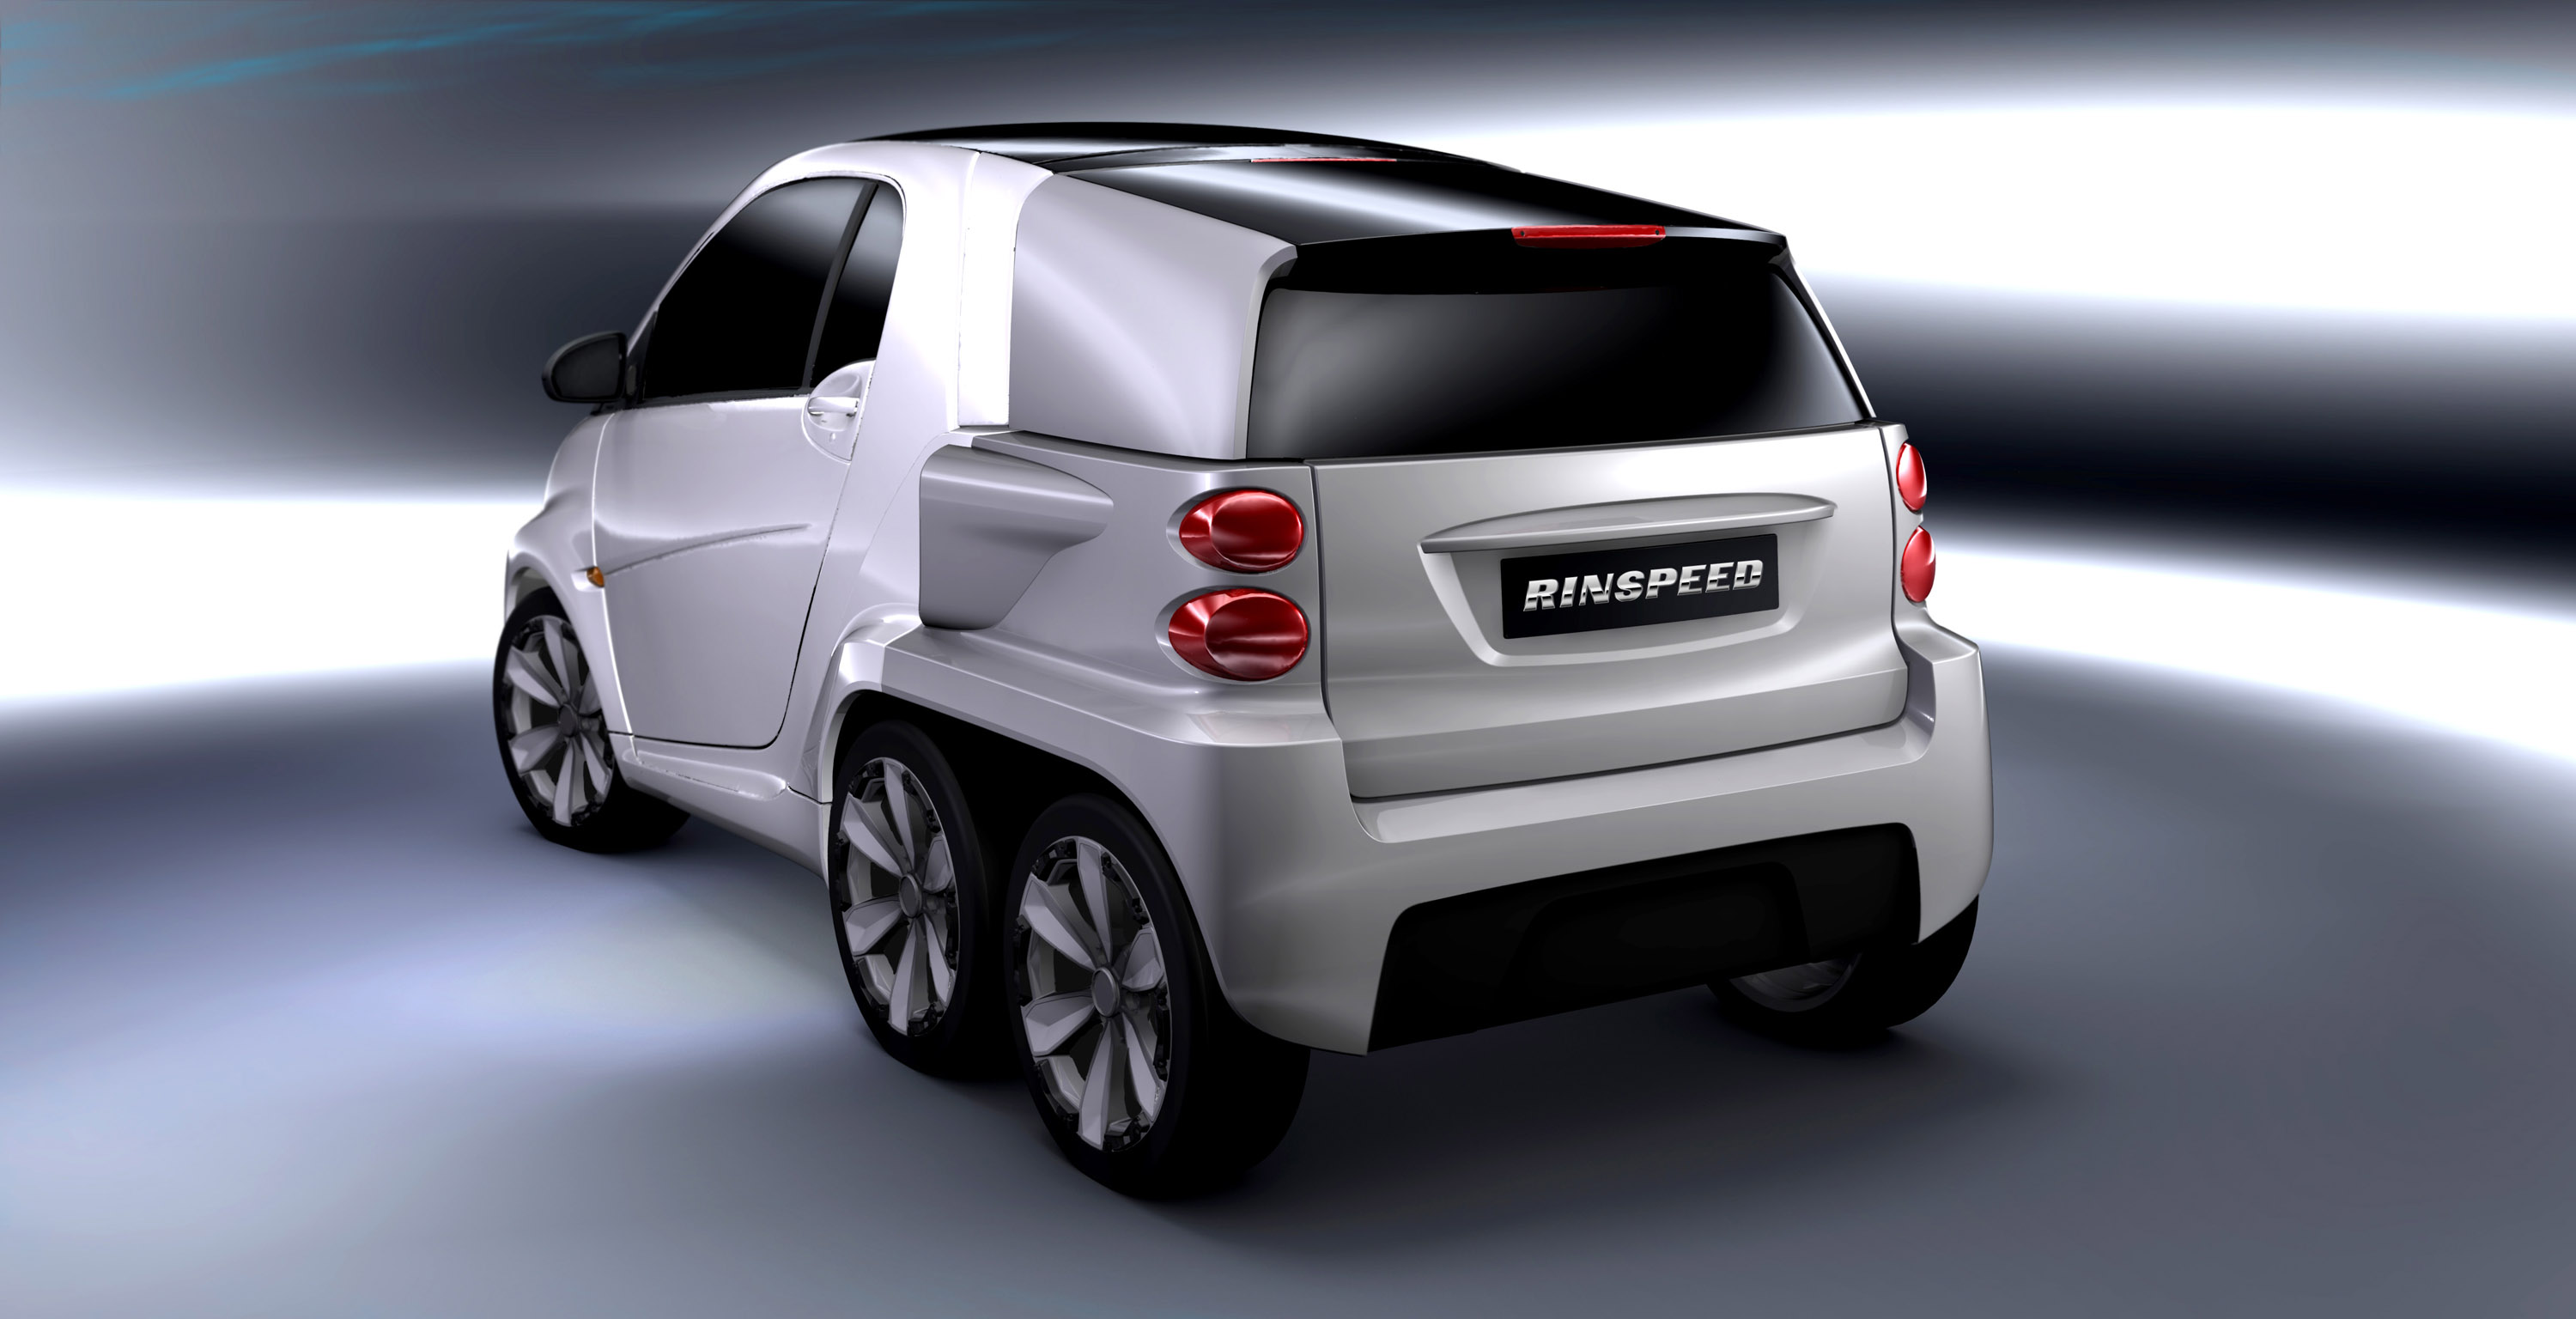 2012, Rinspeed, Dock go, Mobility, Concept Wallpaper